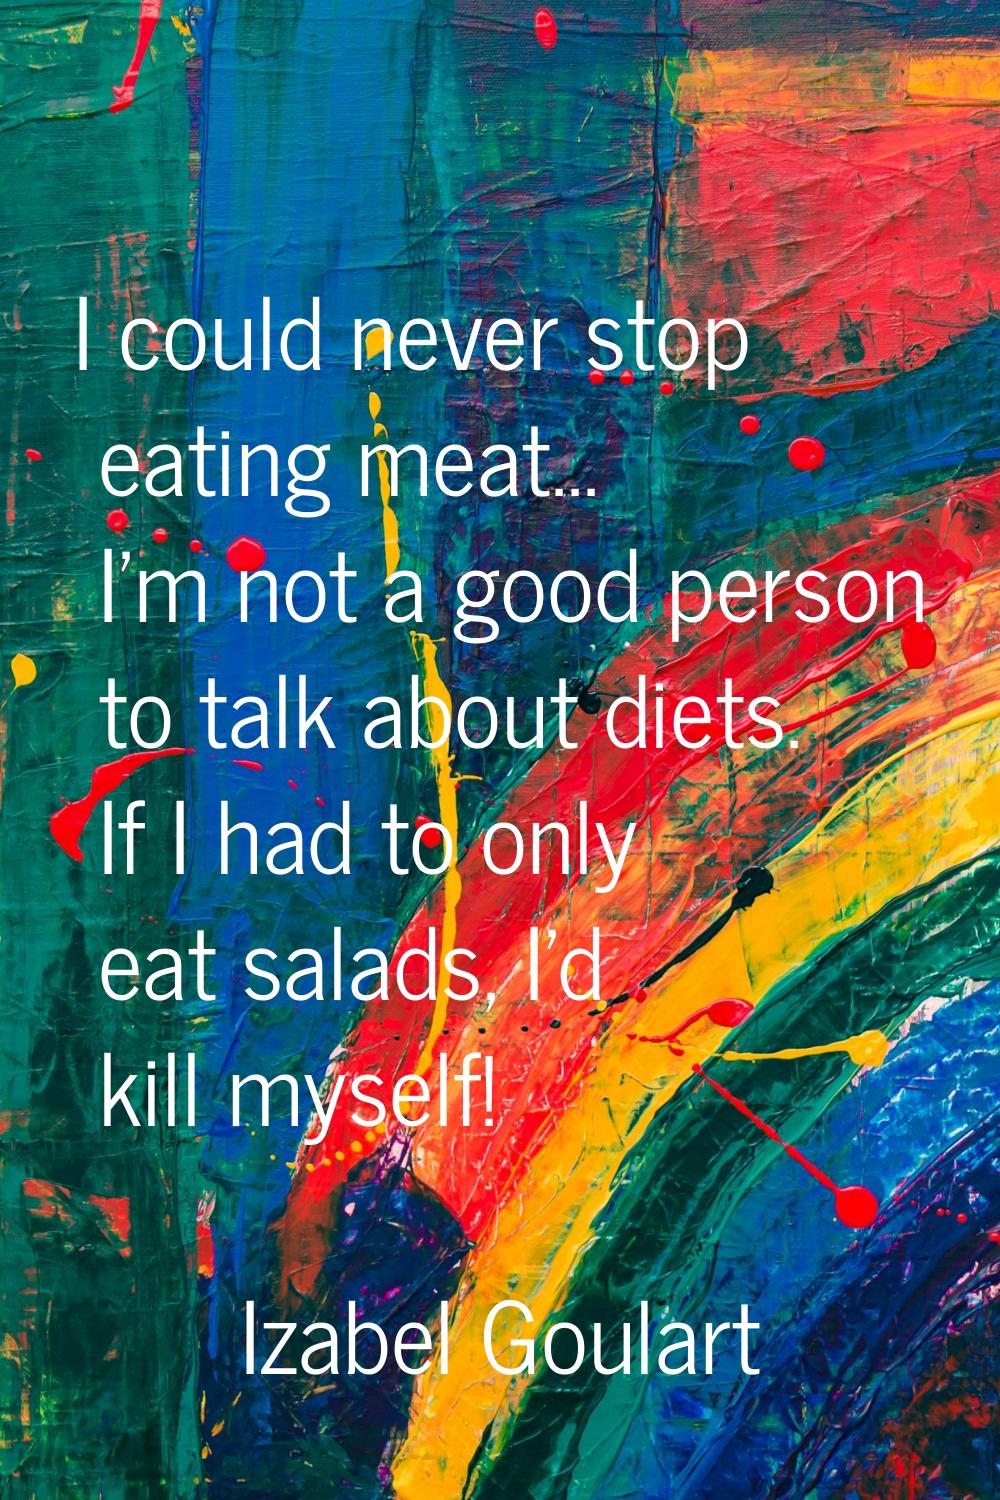 I could never stop eating meat... I'm not a good person to talk about diets. If I had to only eat s